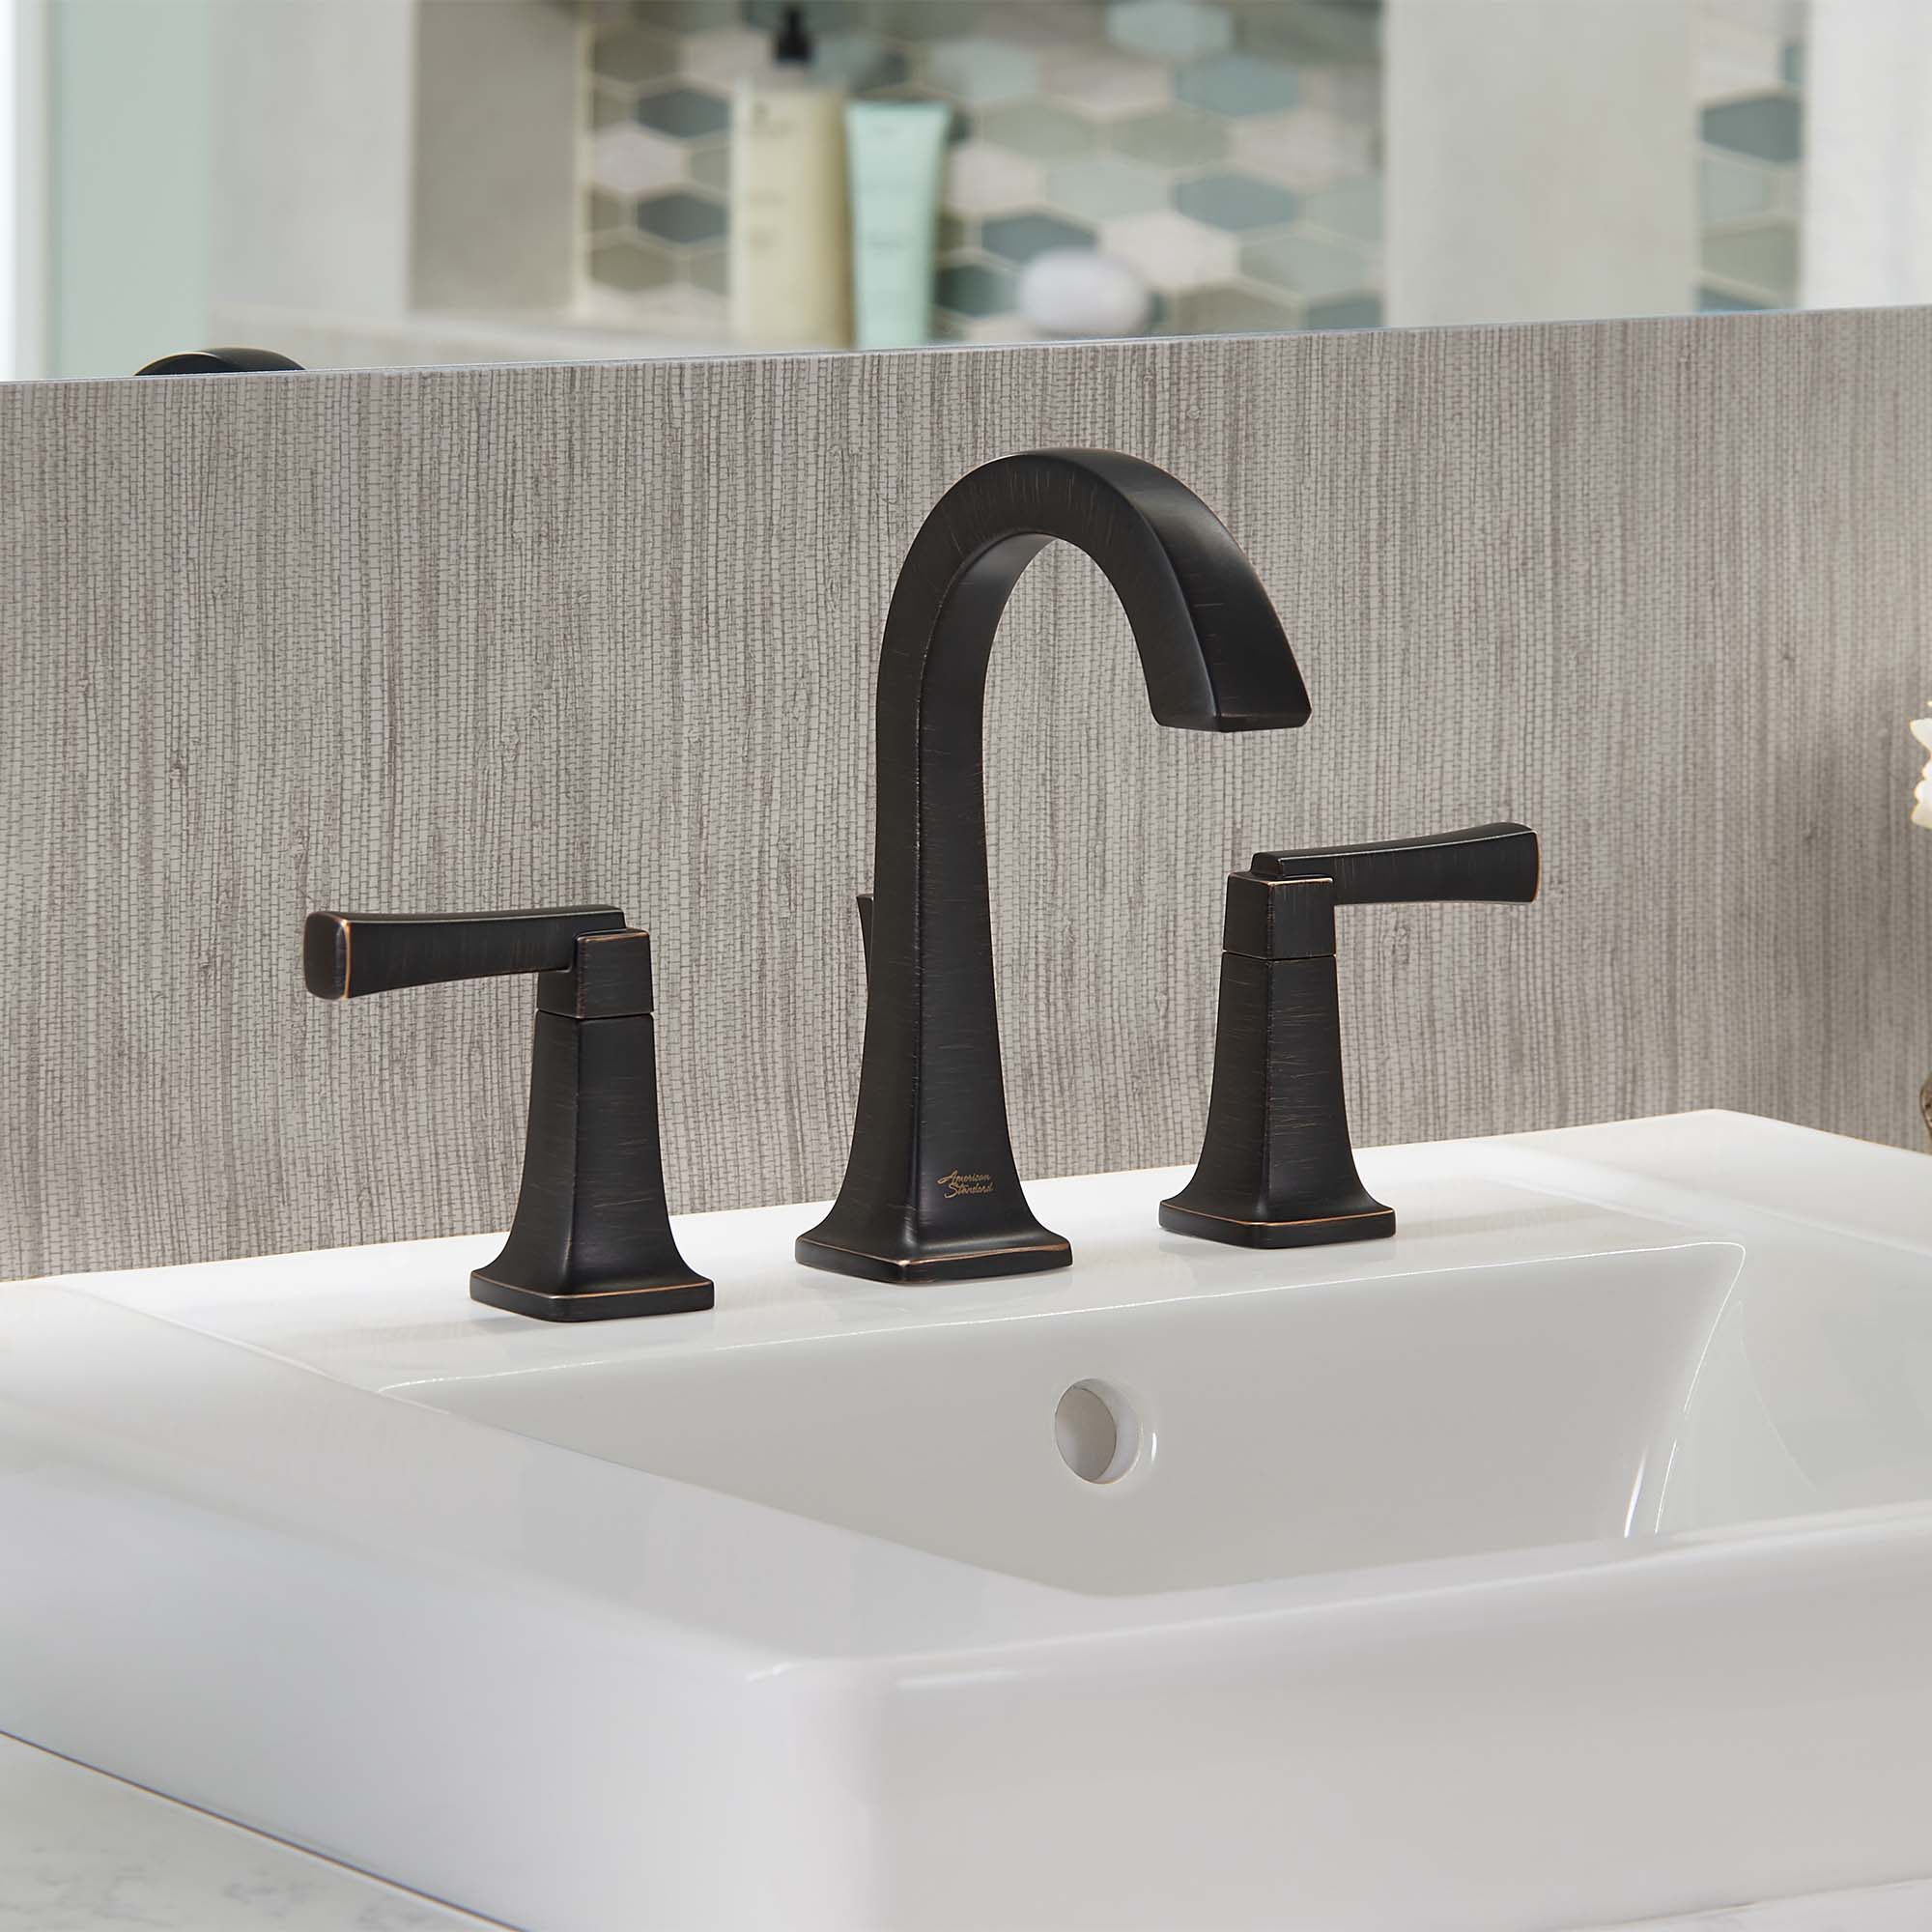 Townsend® 8-Inch Widespread 2-Handle Bathroom Faucet 1.2 gpm/4.5 L/min